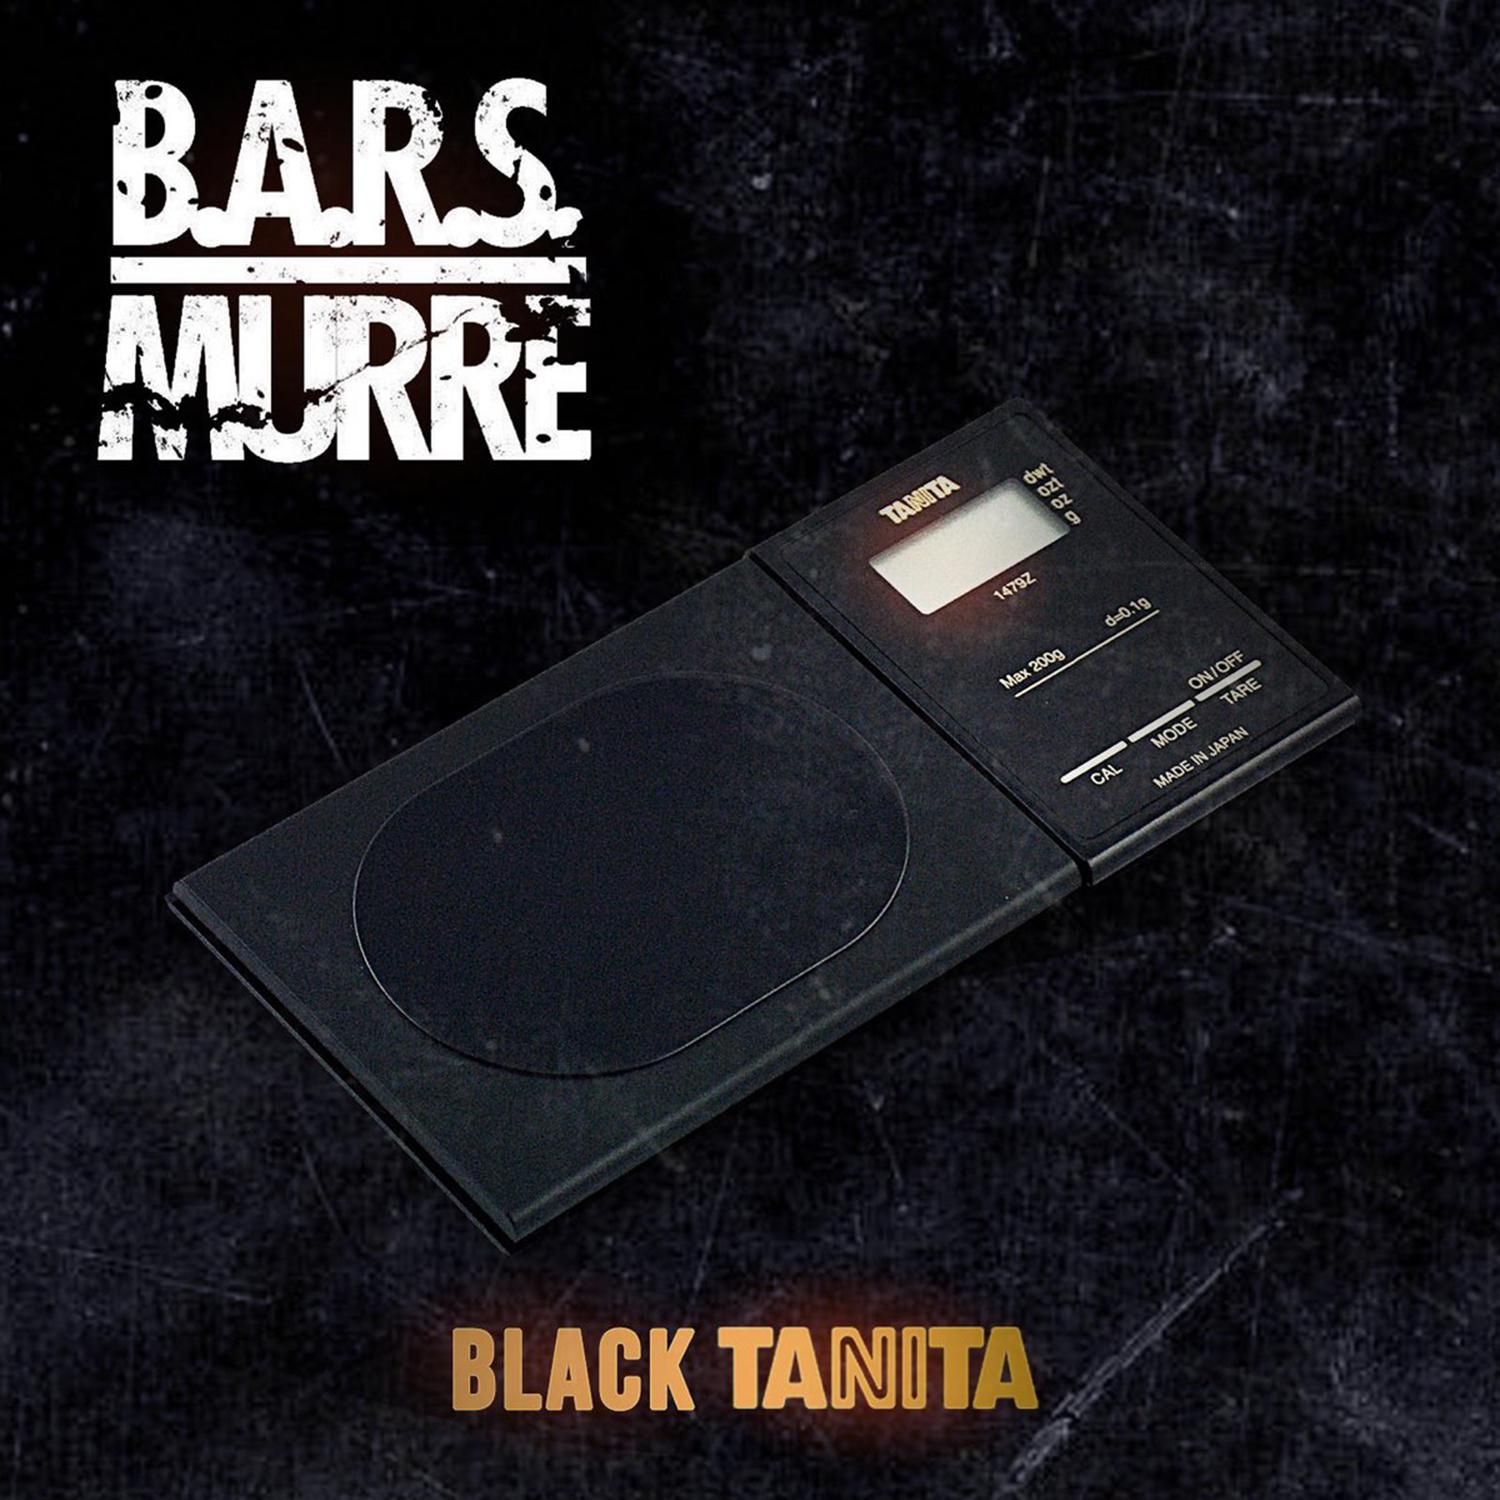 B.A.R.S. Murre - Get This Money (feat. Planet Asia & Tristate)